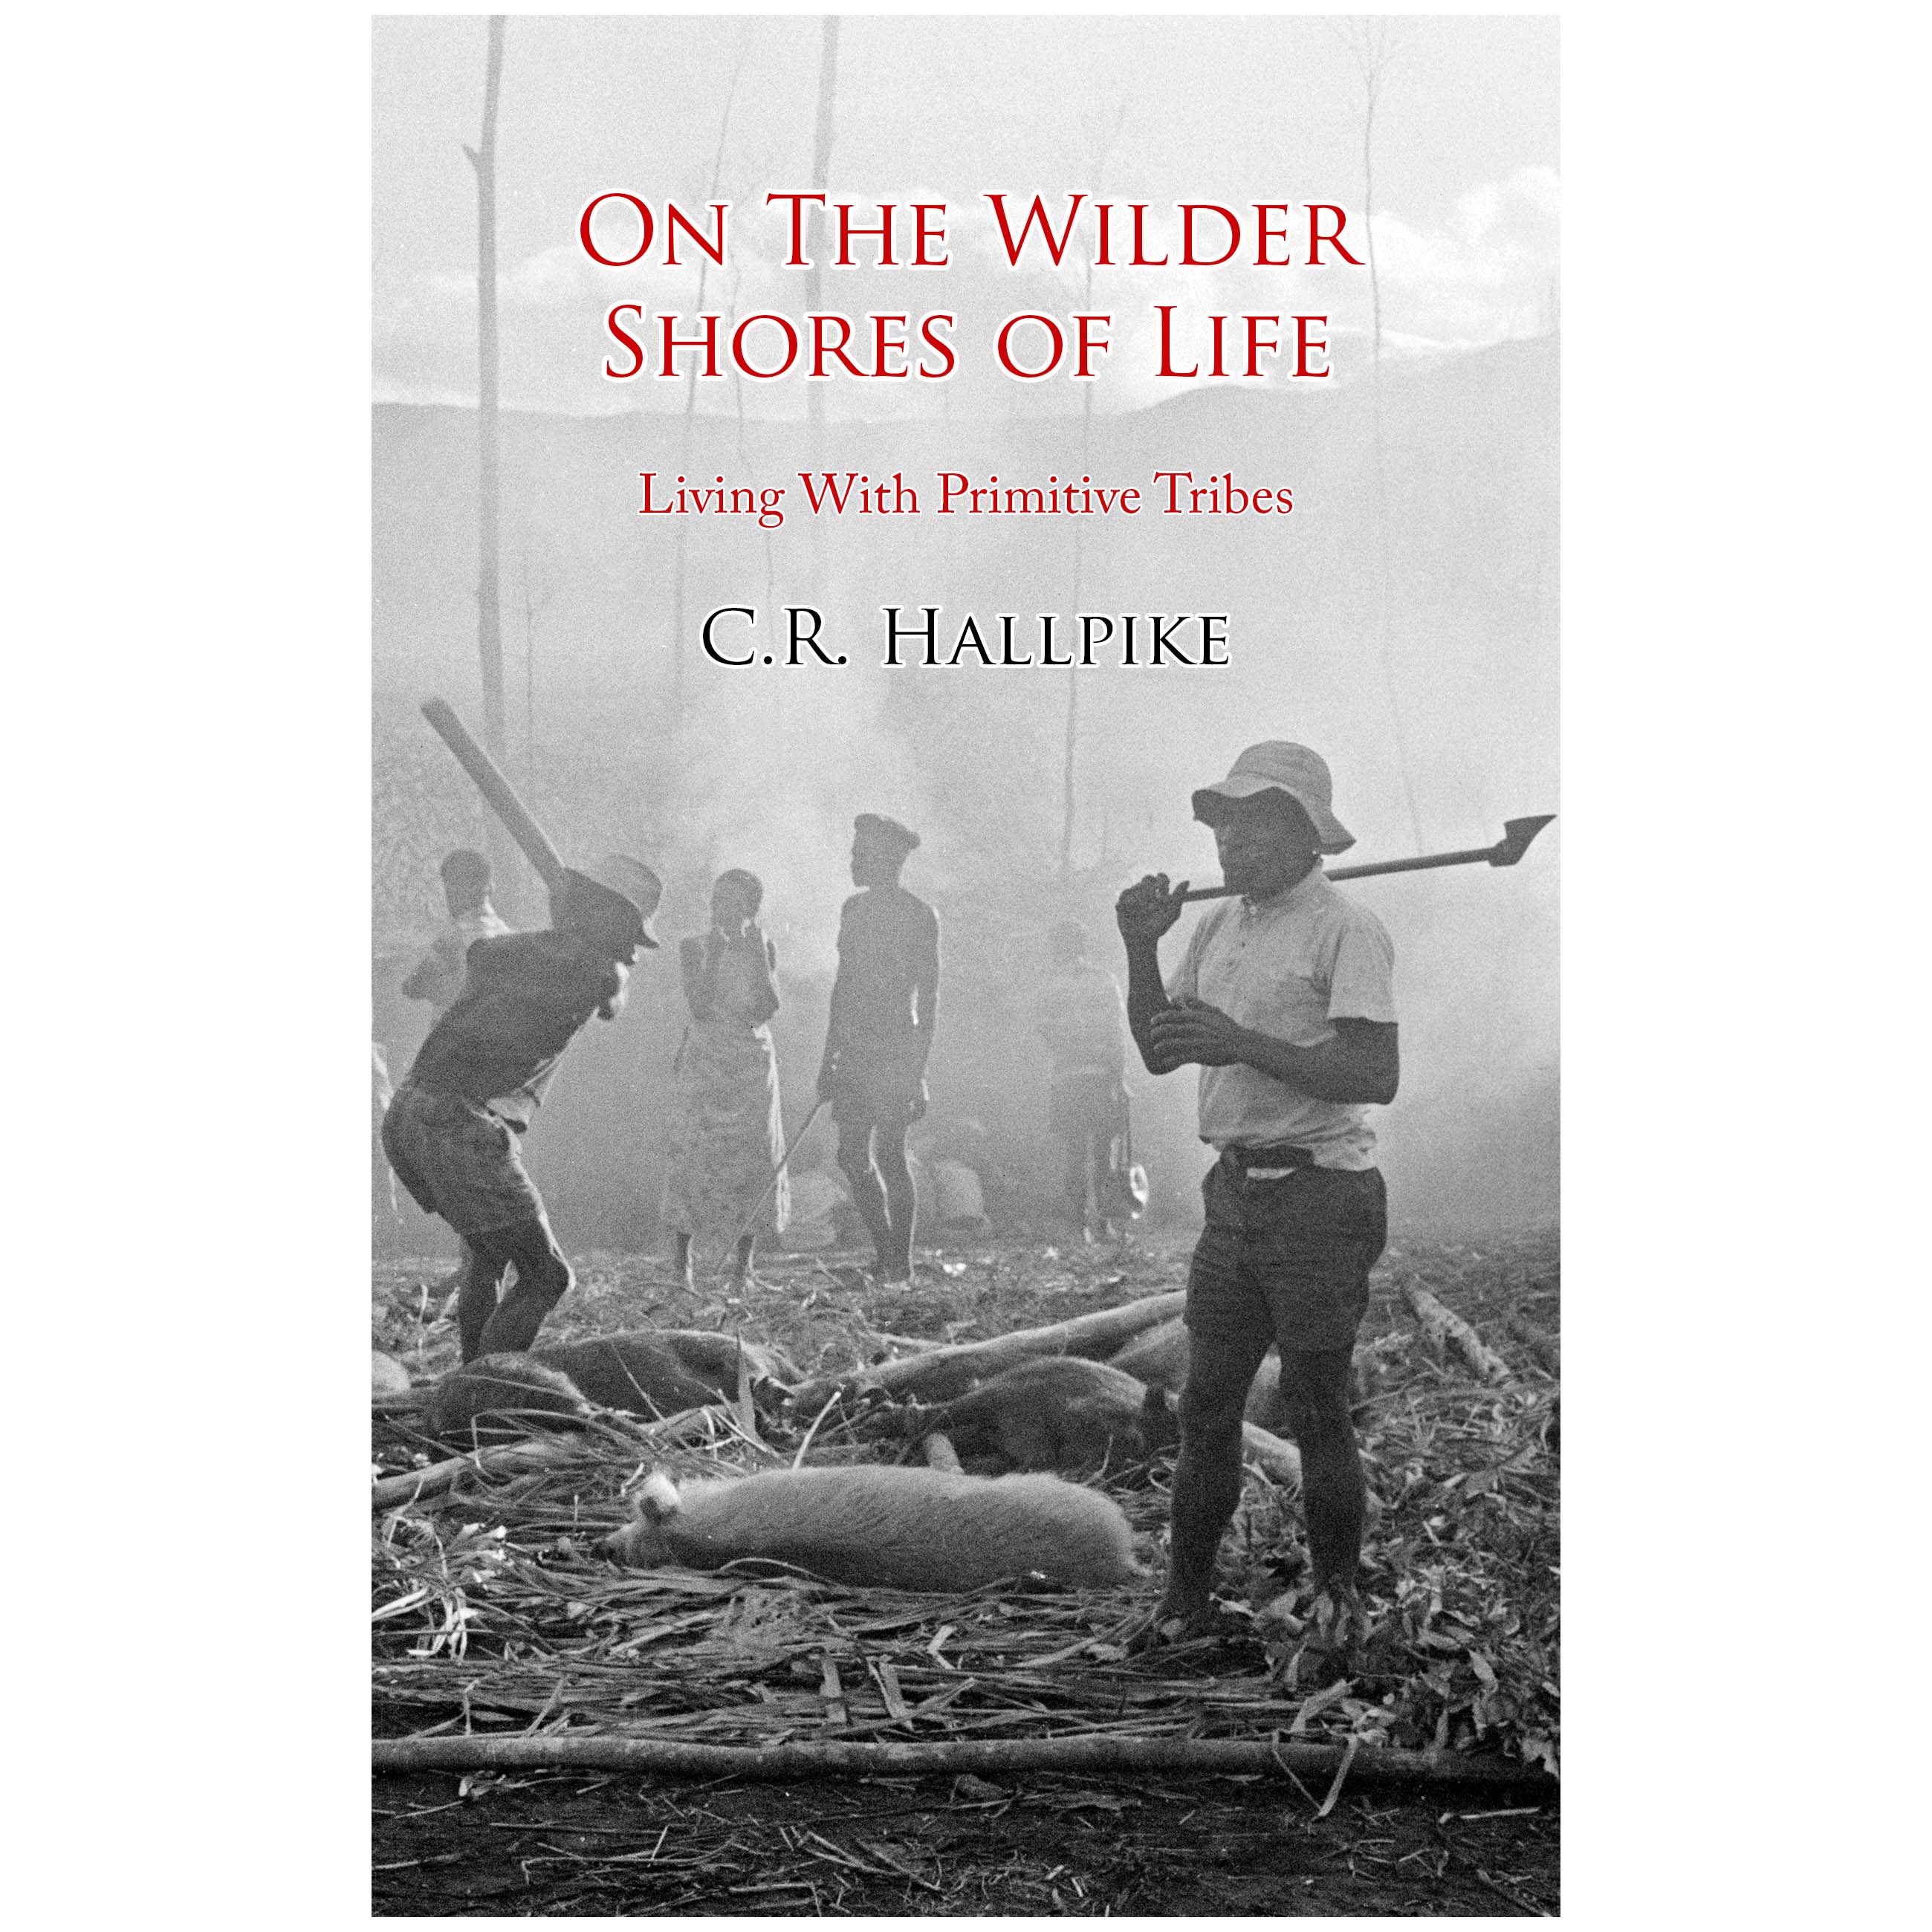 Primitive Tribes – On The Wilder Shores Of Life